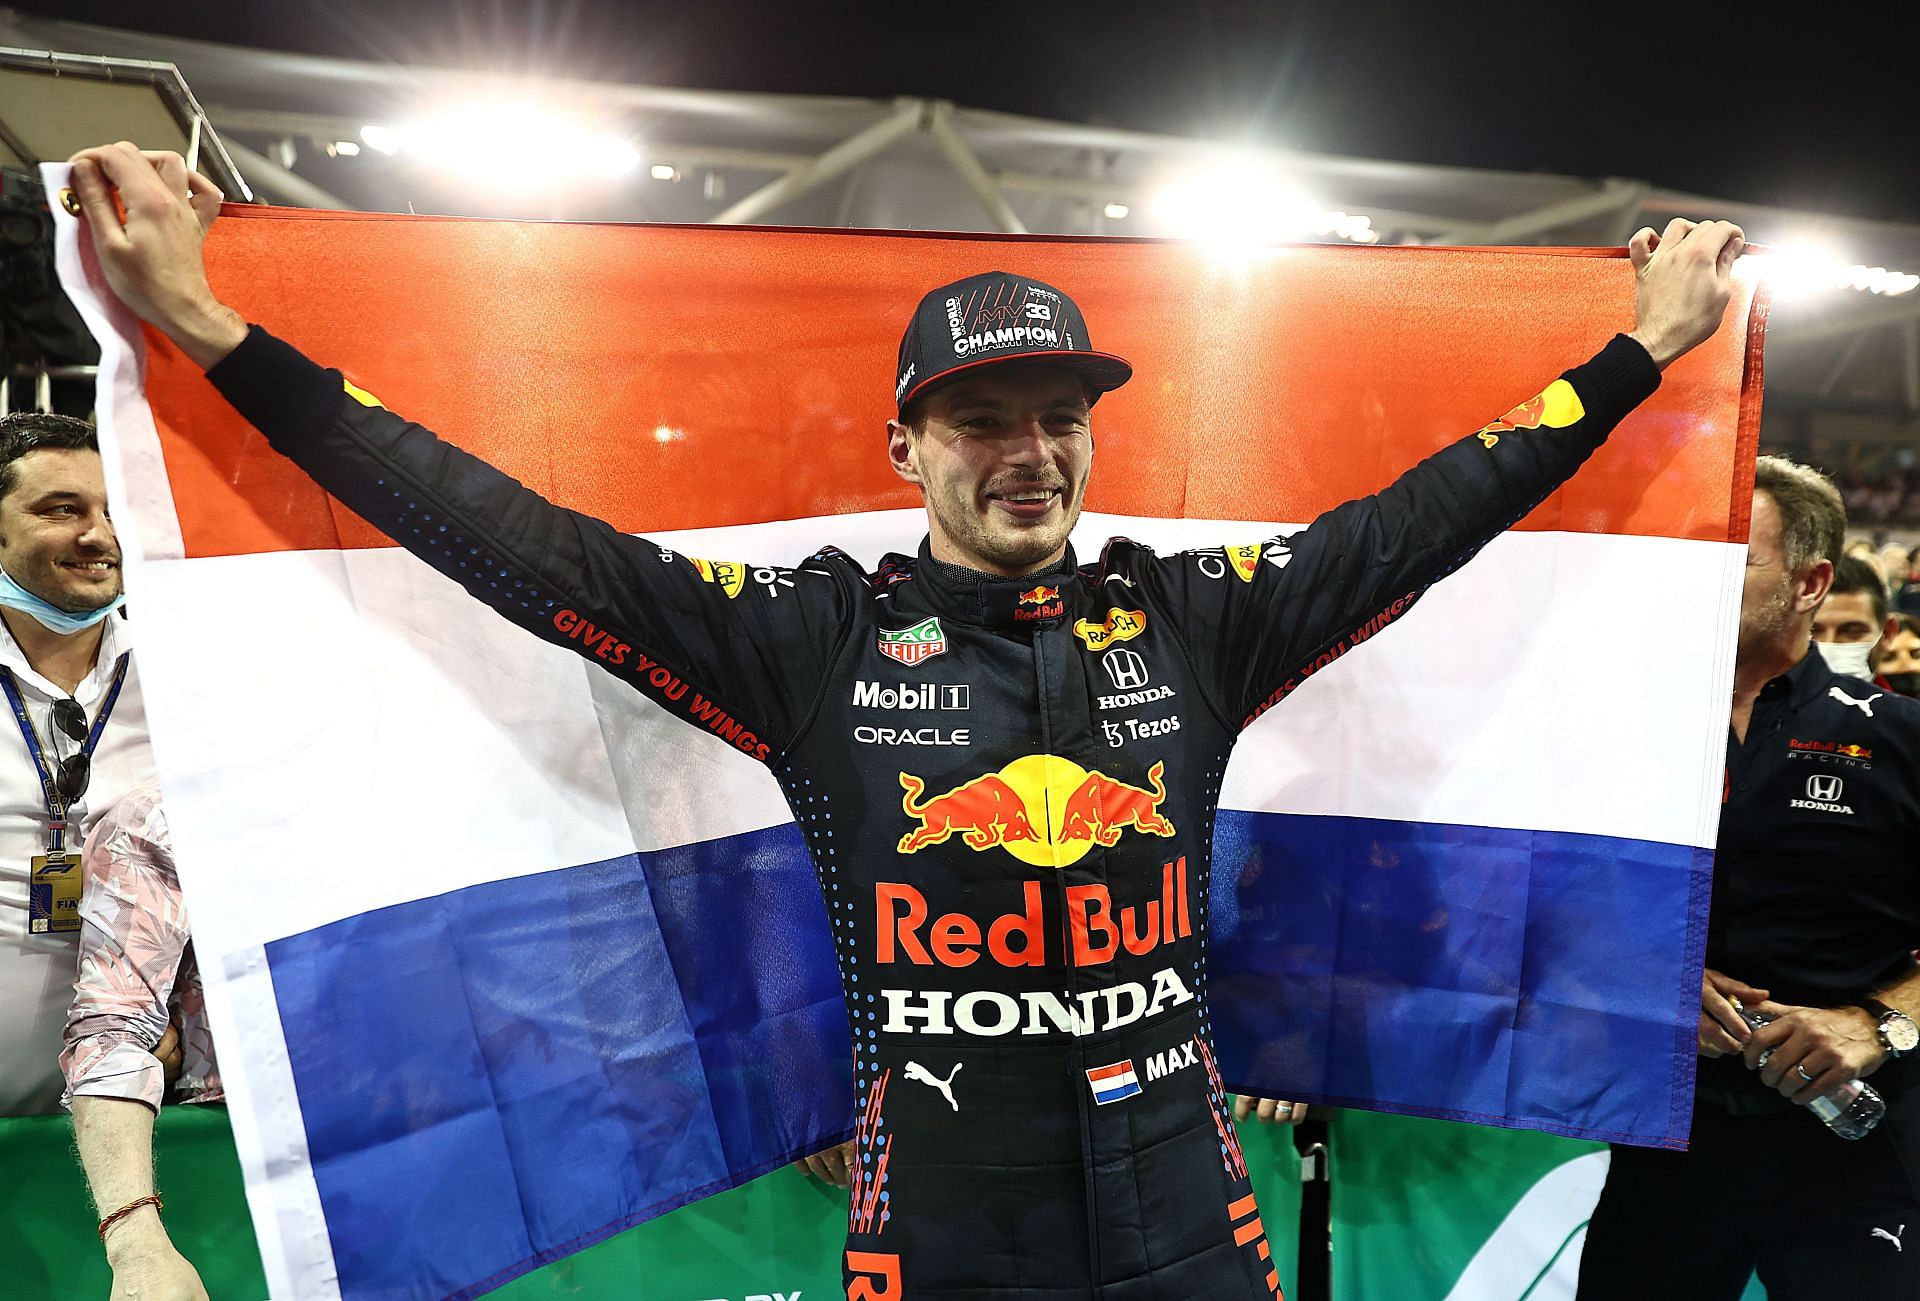 Race winner and 2021 F1 champion Max Verstappen celebrates in Parc Ferme during the F1 Grand Prix of Abu Dhabi at Yas Marina Circuit. (Photo by Mark Thompson/Getty Images)